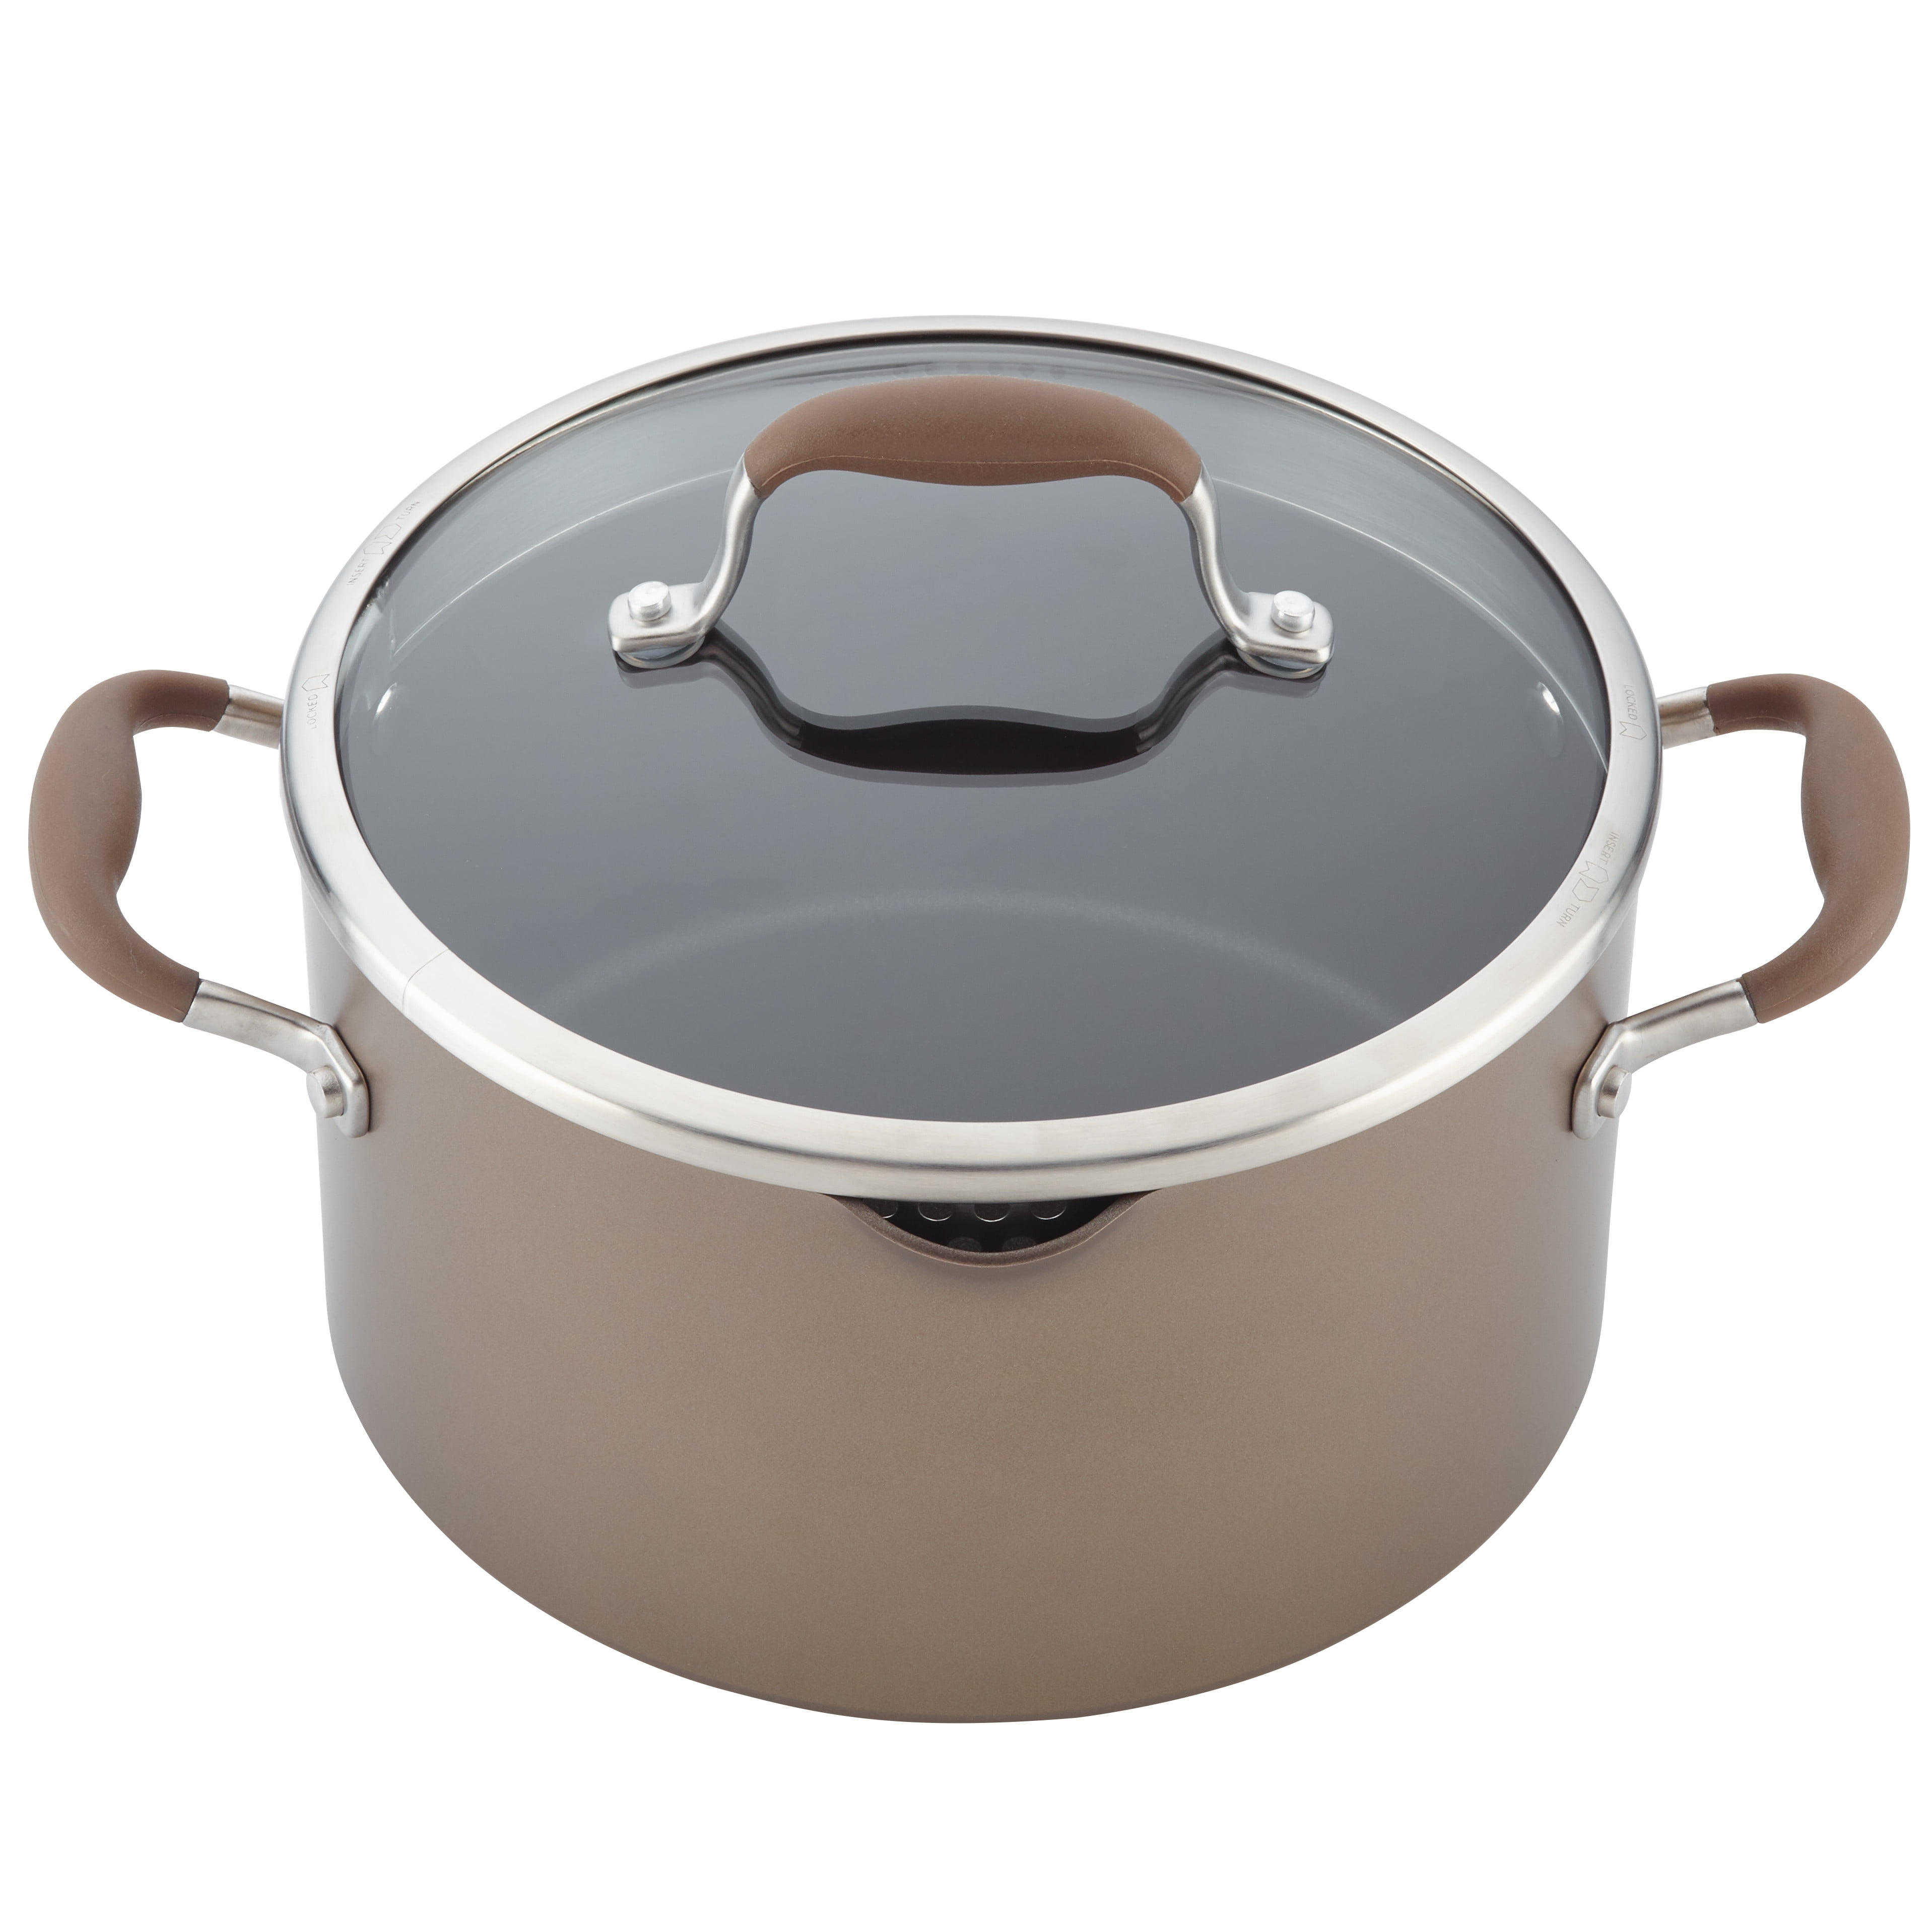 8.5-Quart Wide Stockpot with Multi-Function Insert – Anolon